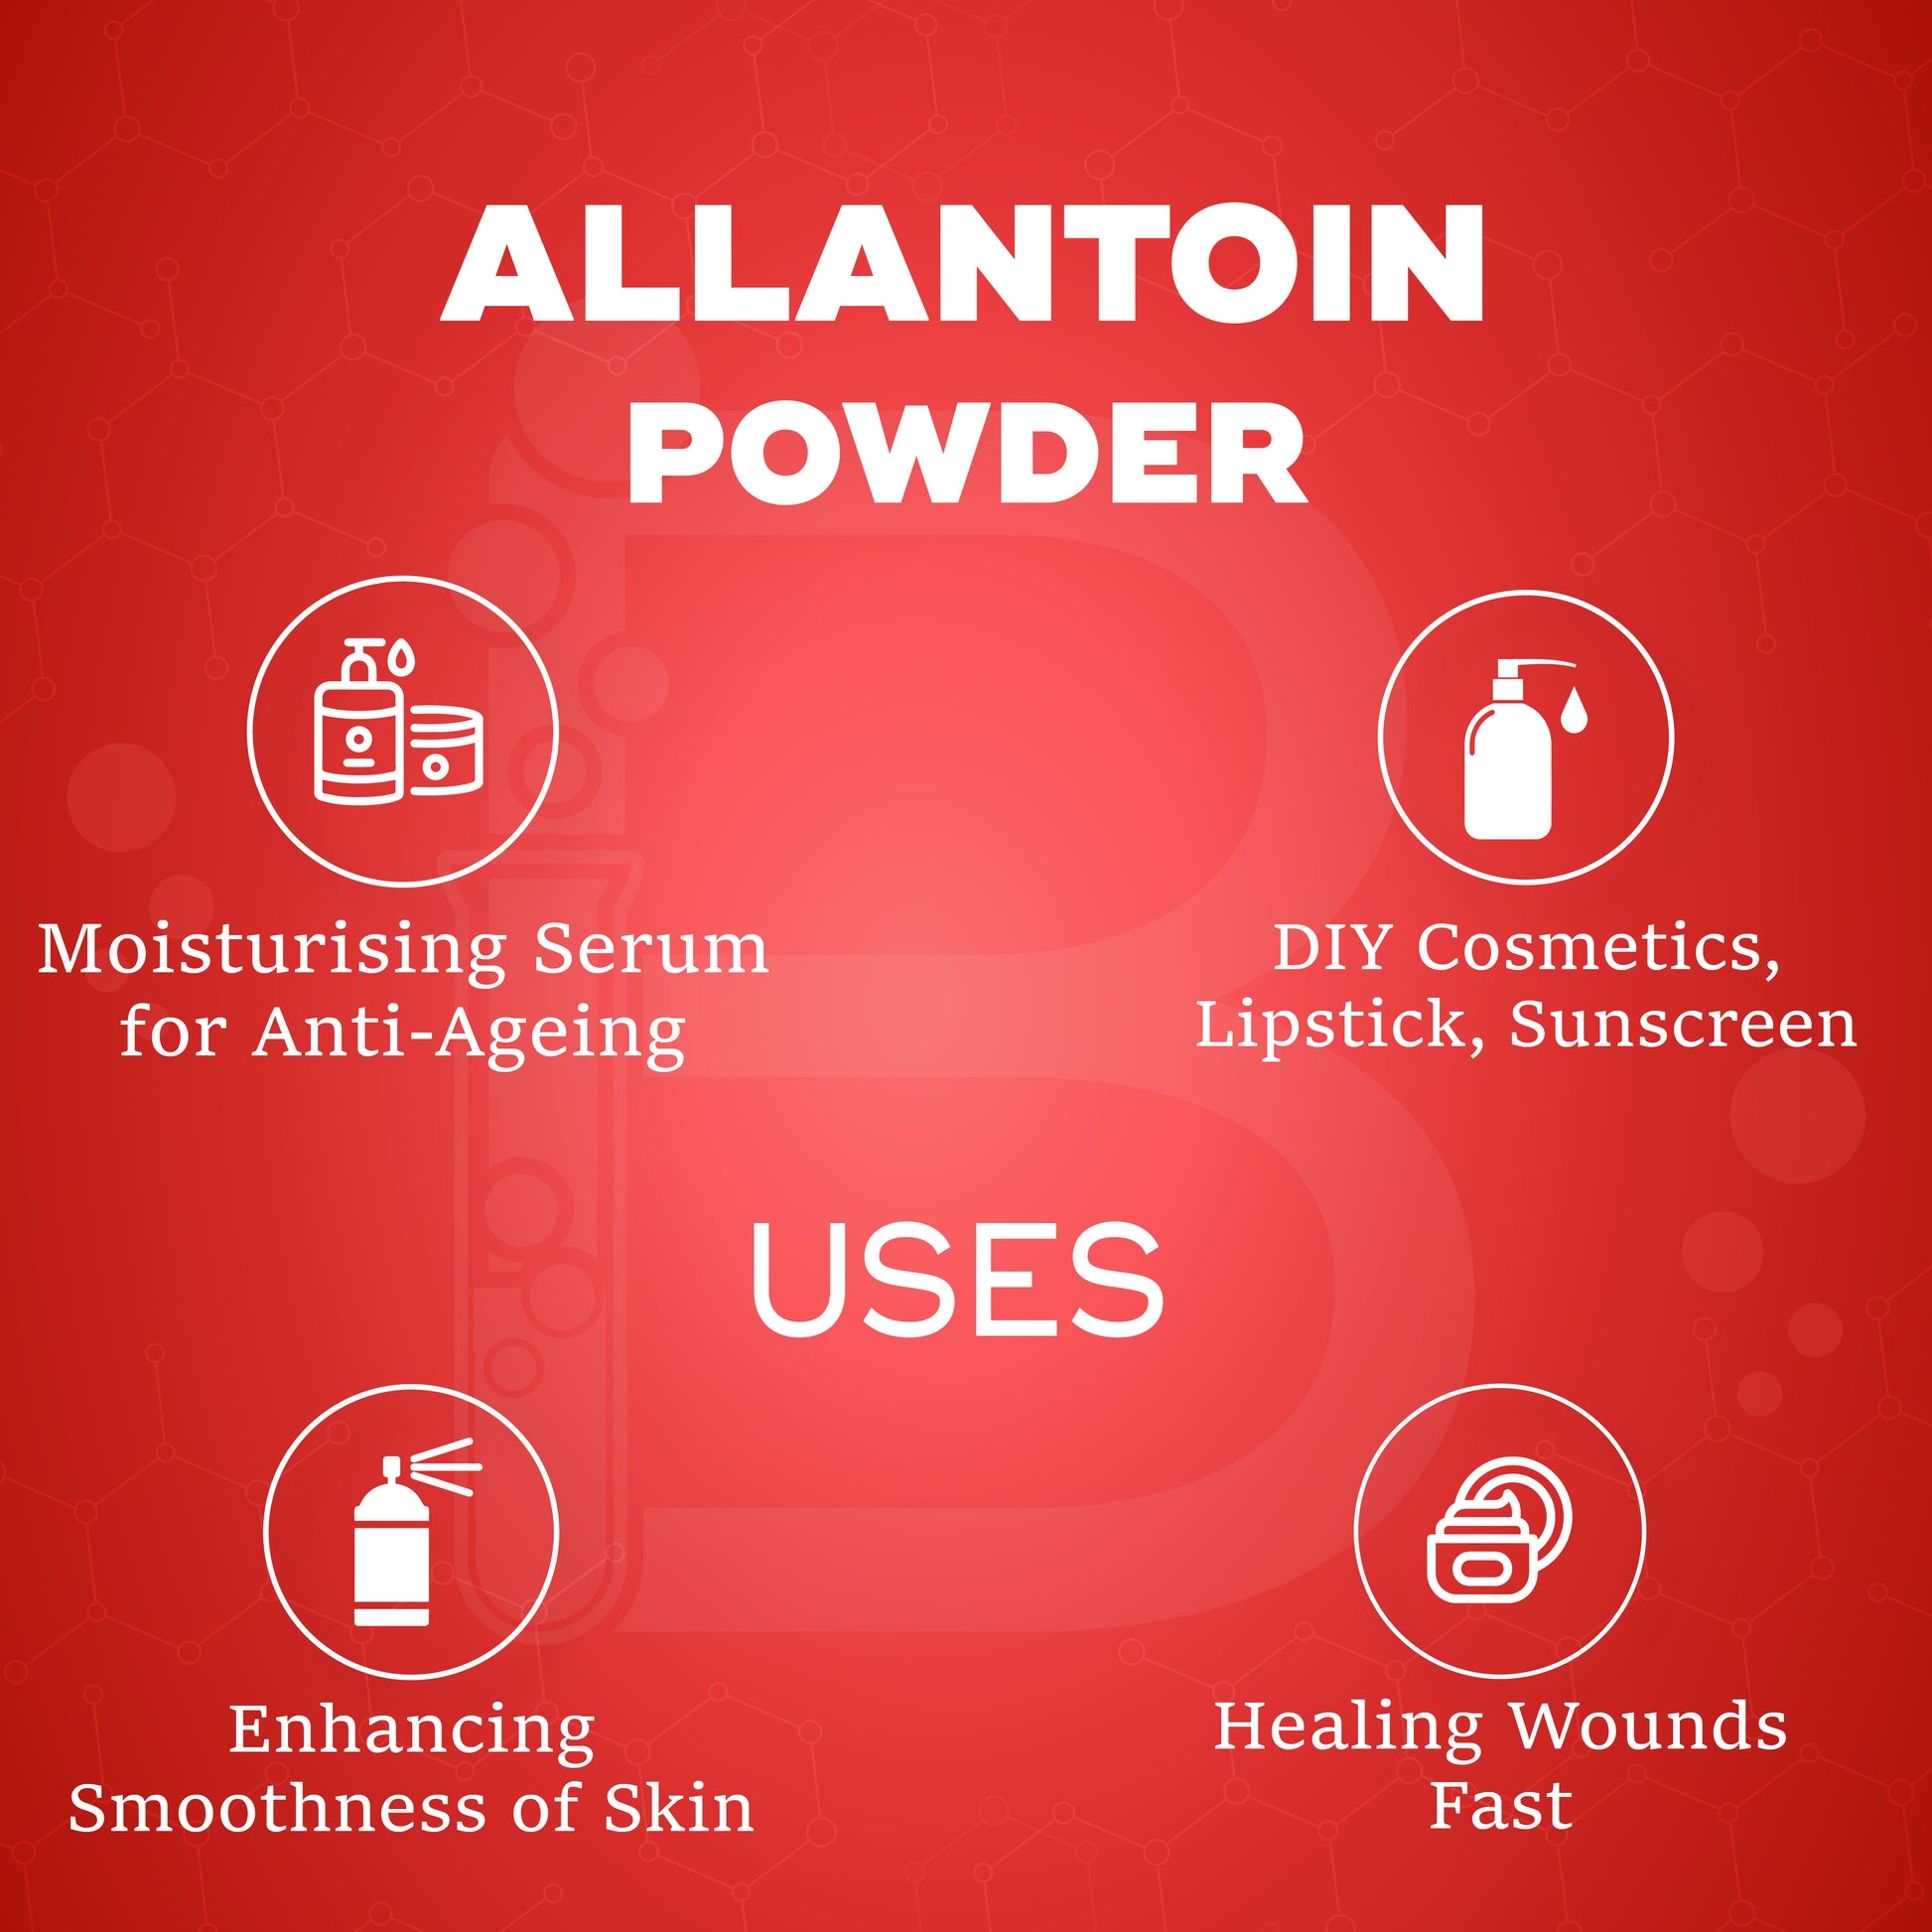 uses of allantoin powder, about uses of allantoin powder